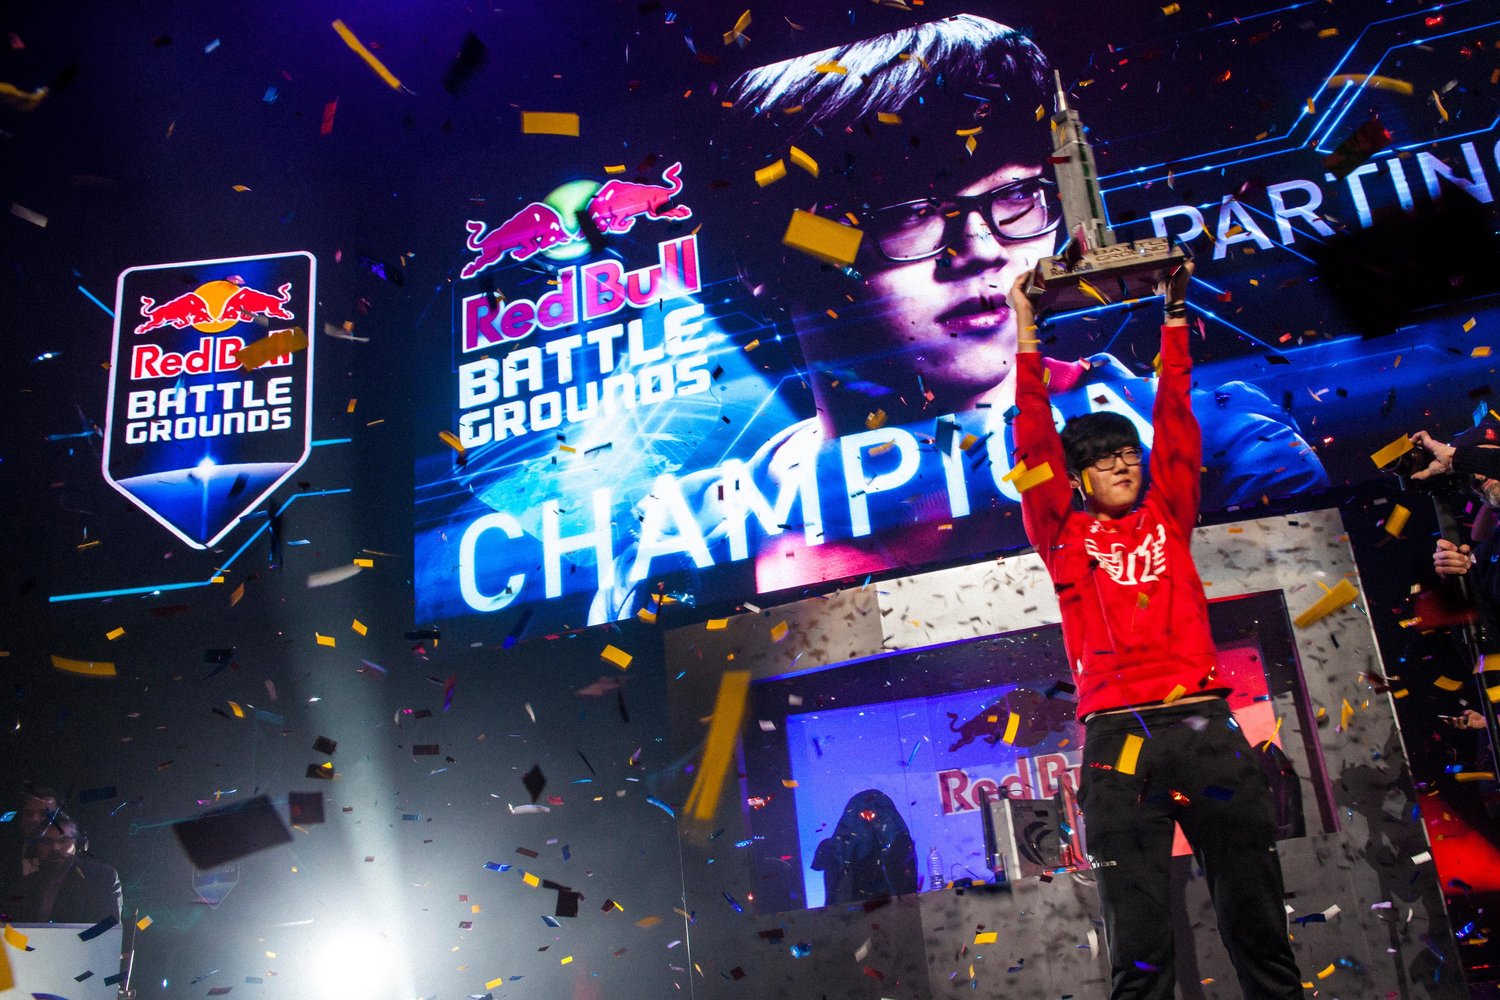 PartinG celebrates his victory over sOs in the final of Red Bull Battle Grounds, at the Hammerstein Ballroom in New York City, NY, USA on 24 November, 2013.